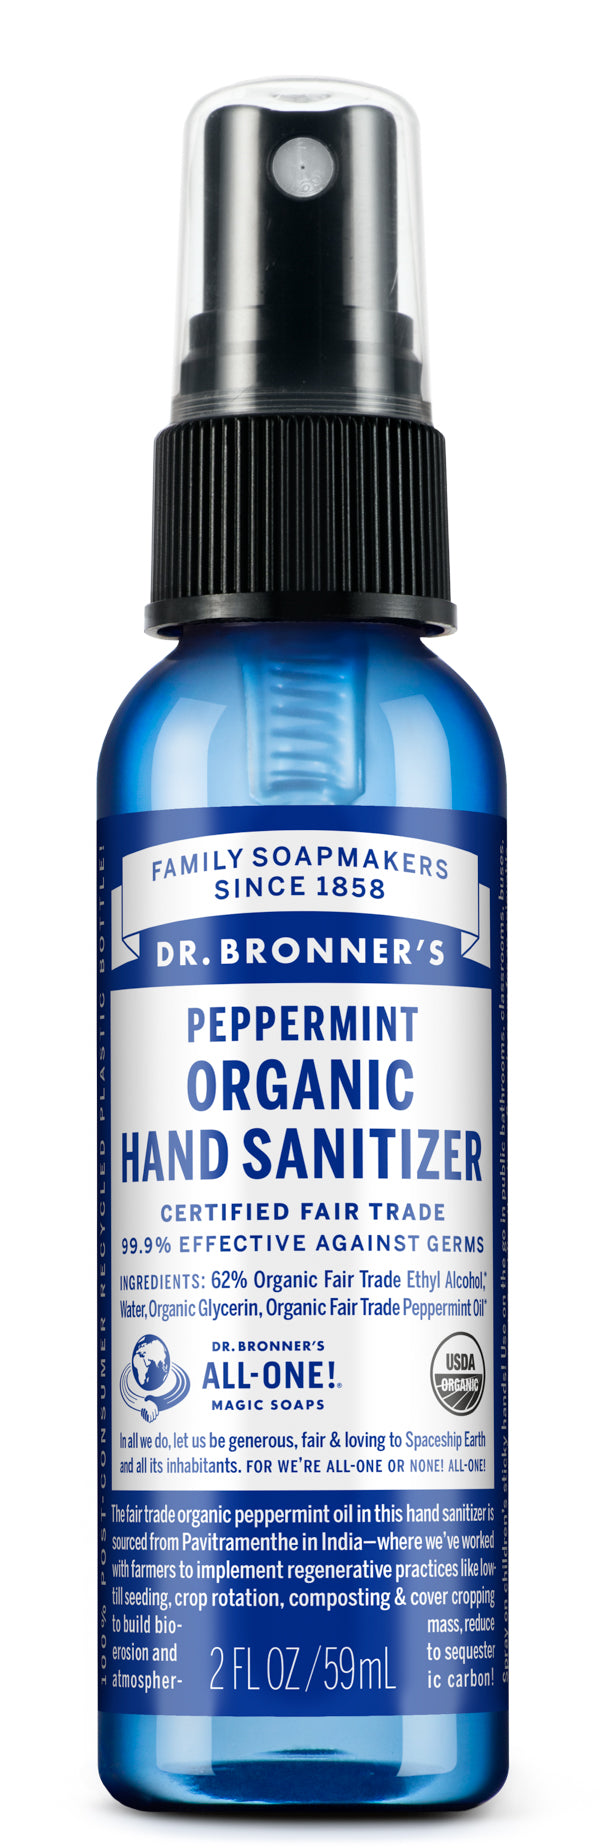 Peppermint Organic Hand Sanitizer (12 Pack)